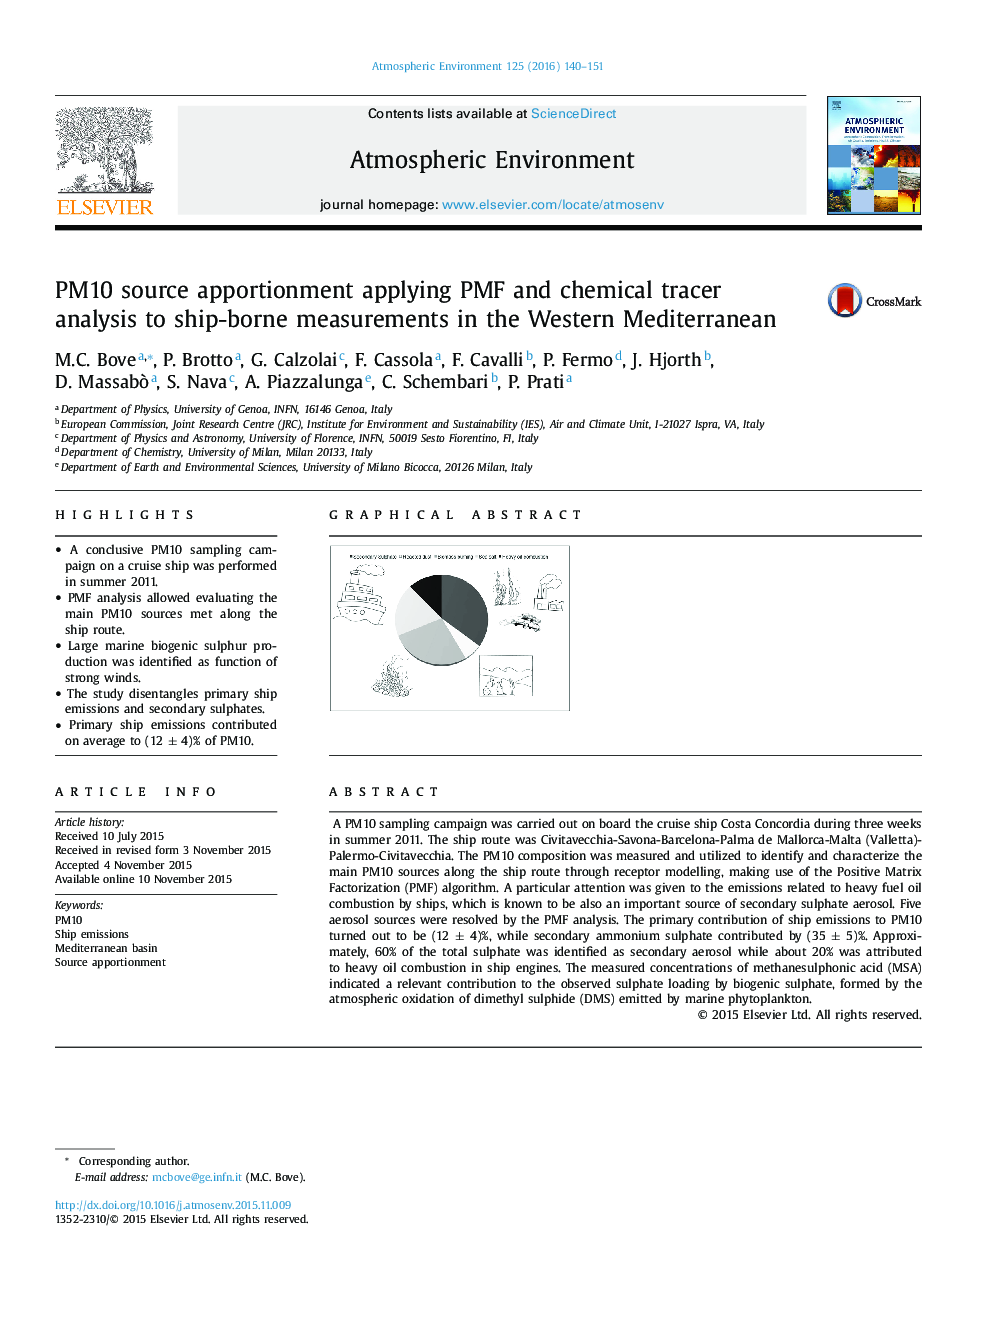 PM10 source apportionment applying PMF and chemical tracer analysis to ship-borne measurements in the Western Mediterranean